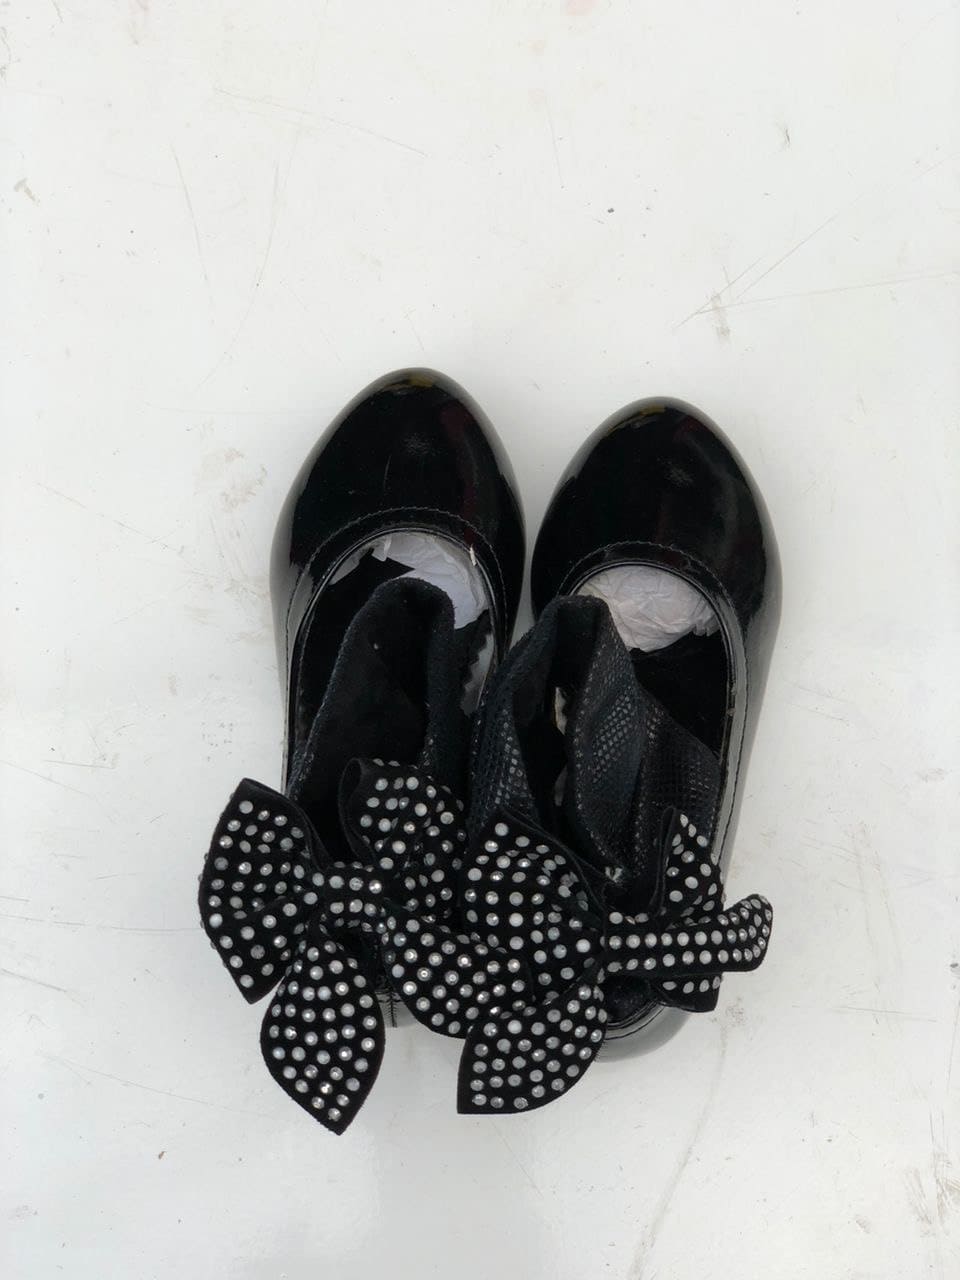 NeasFashion product - Black kids shoes for females